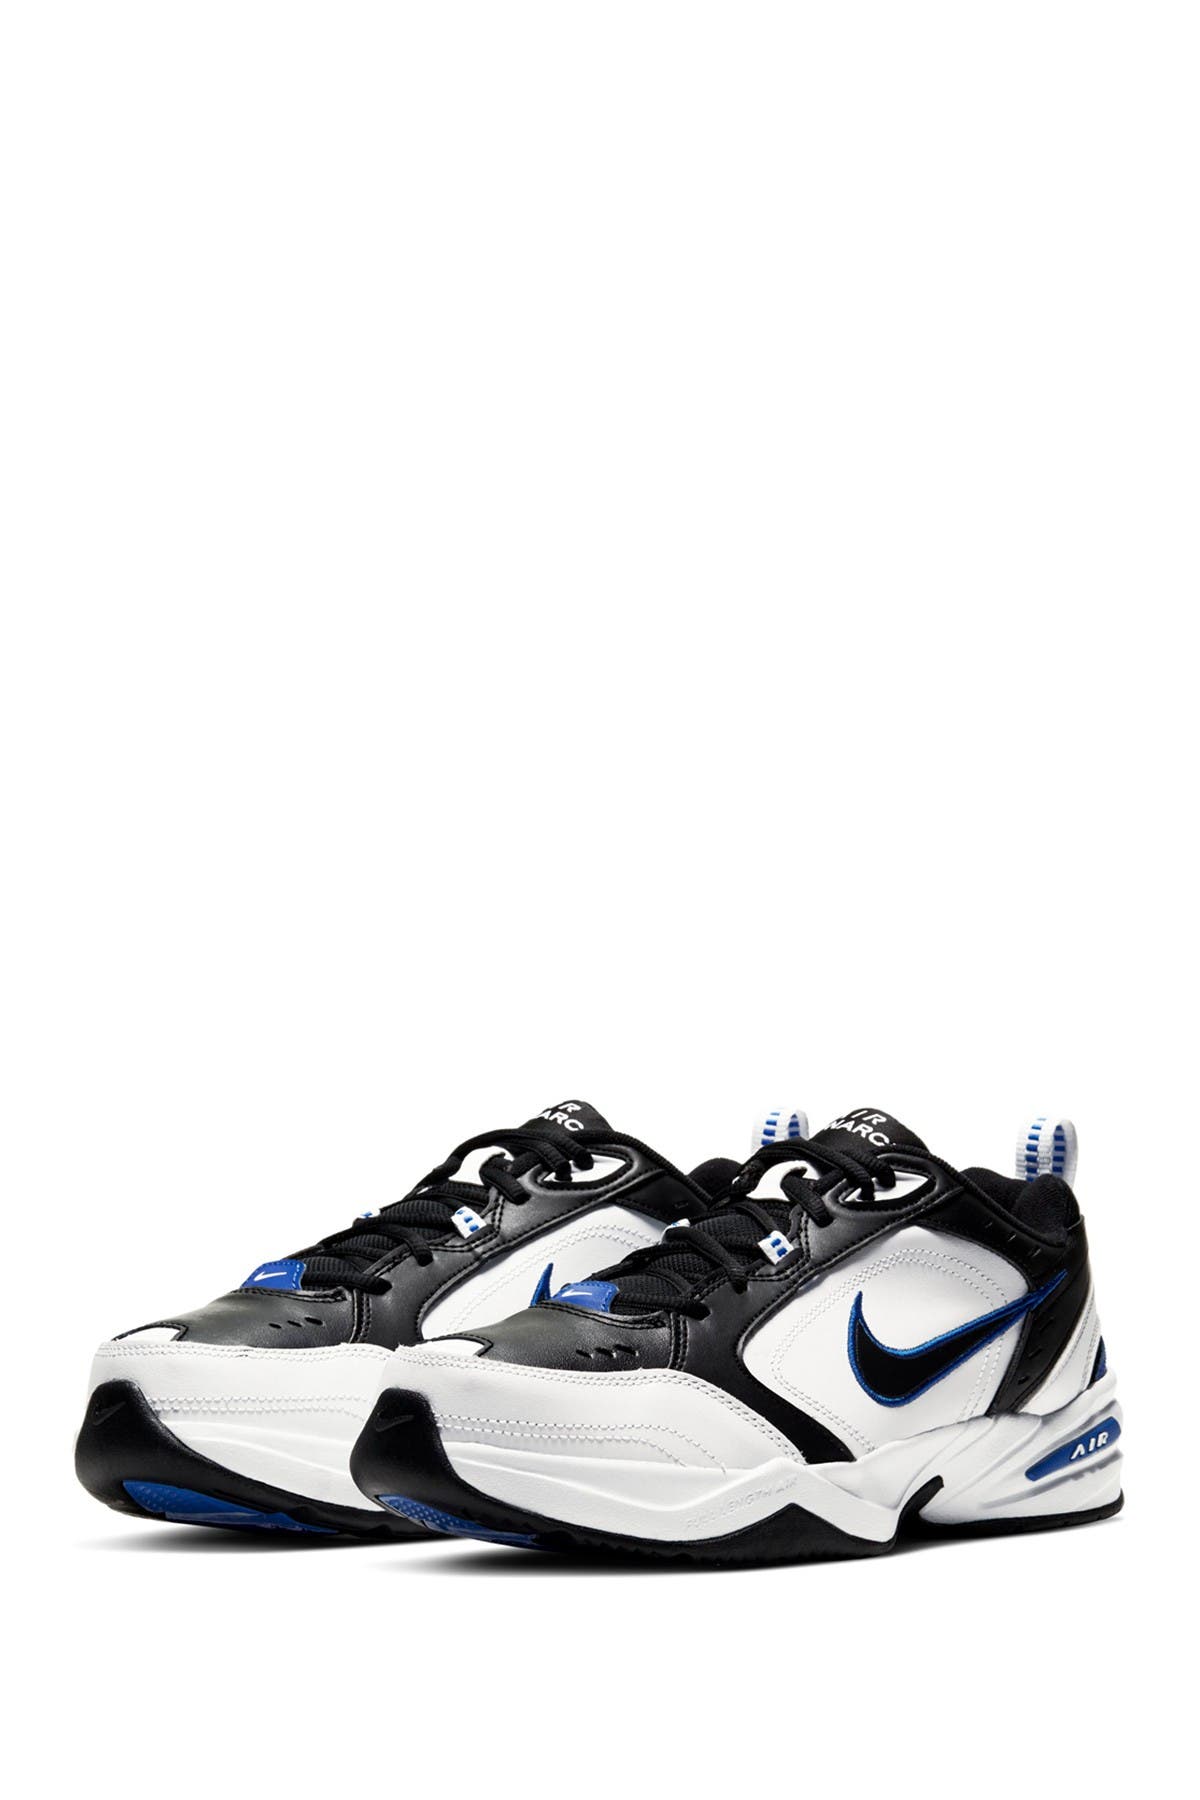 Nike Air Monarch Iv 4e Training Sneaker Extra Wide Width Nordstrom Rack